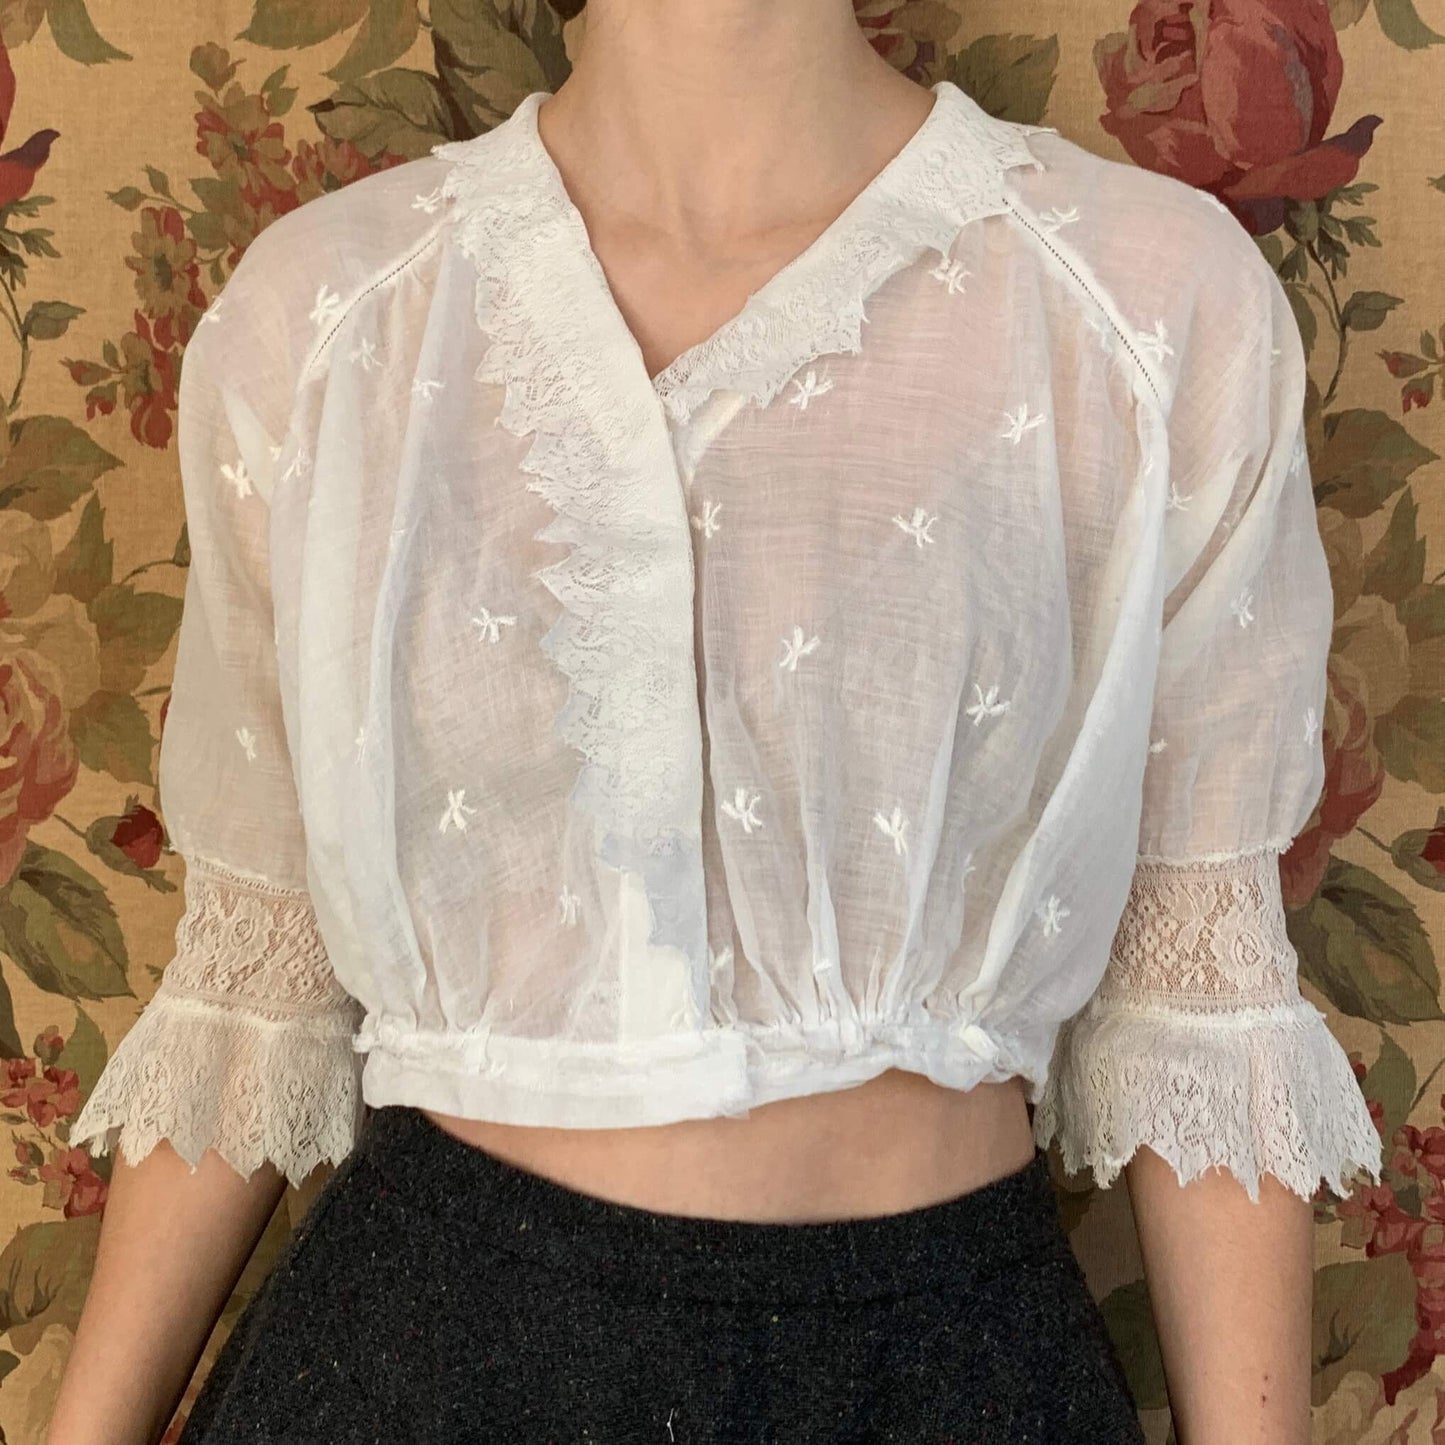 White Edwardian Blouse with embroidered flowers and lace sleeves